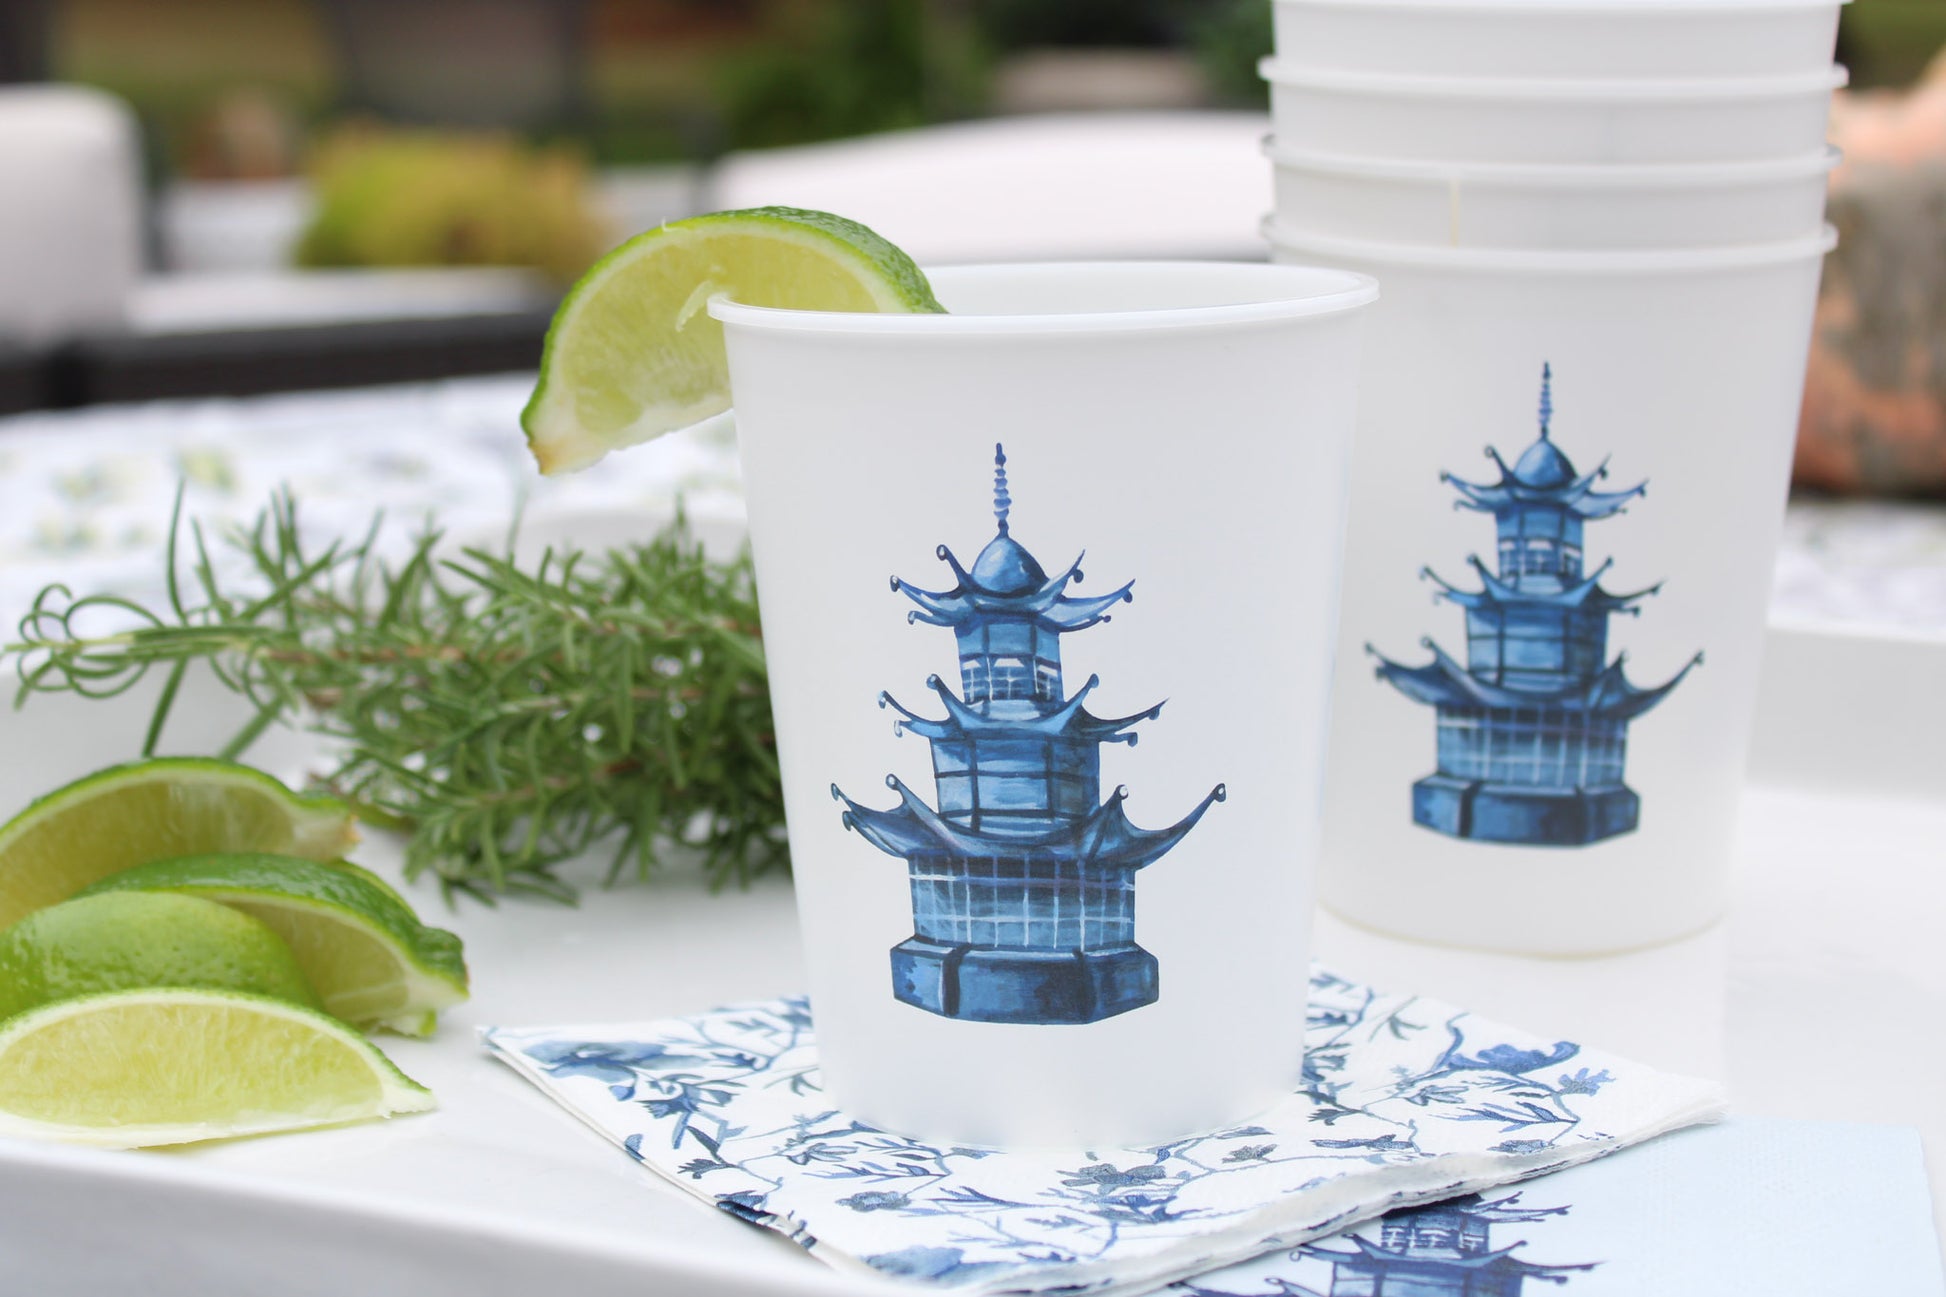 Blue Pagoda Reusable Cup Set by FOSTER